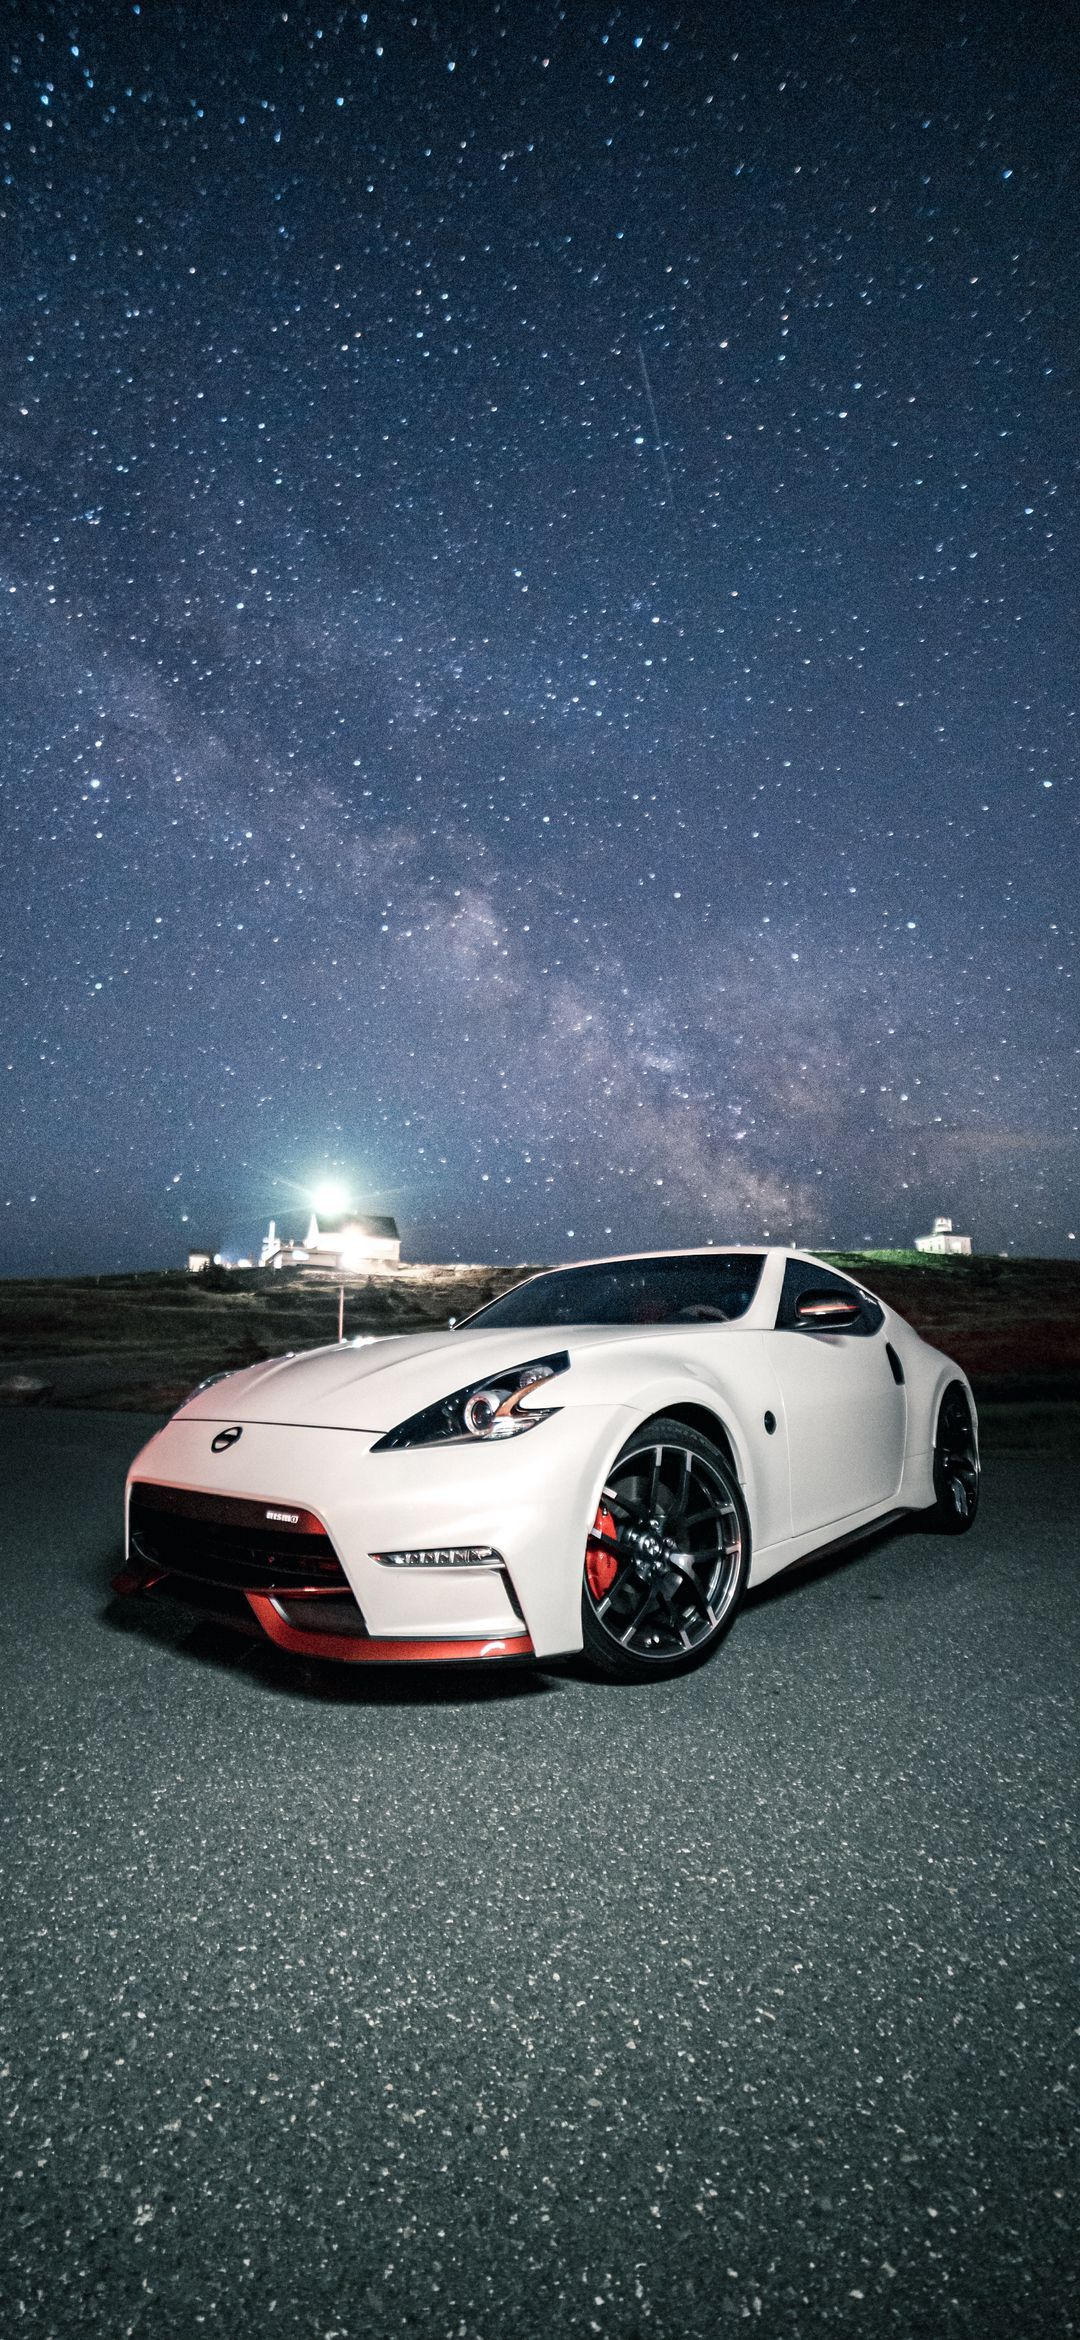 1080x2340 Pin by phone wallpaper on cars \u0026+ Motorcycle | Best jdm cars, Nissan 370z nismo, Sports cars luxury